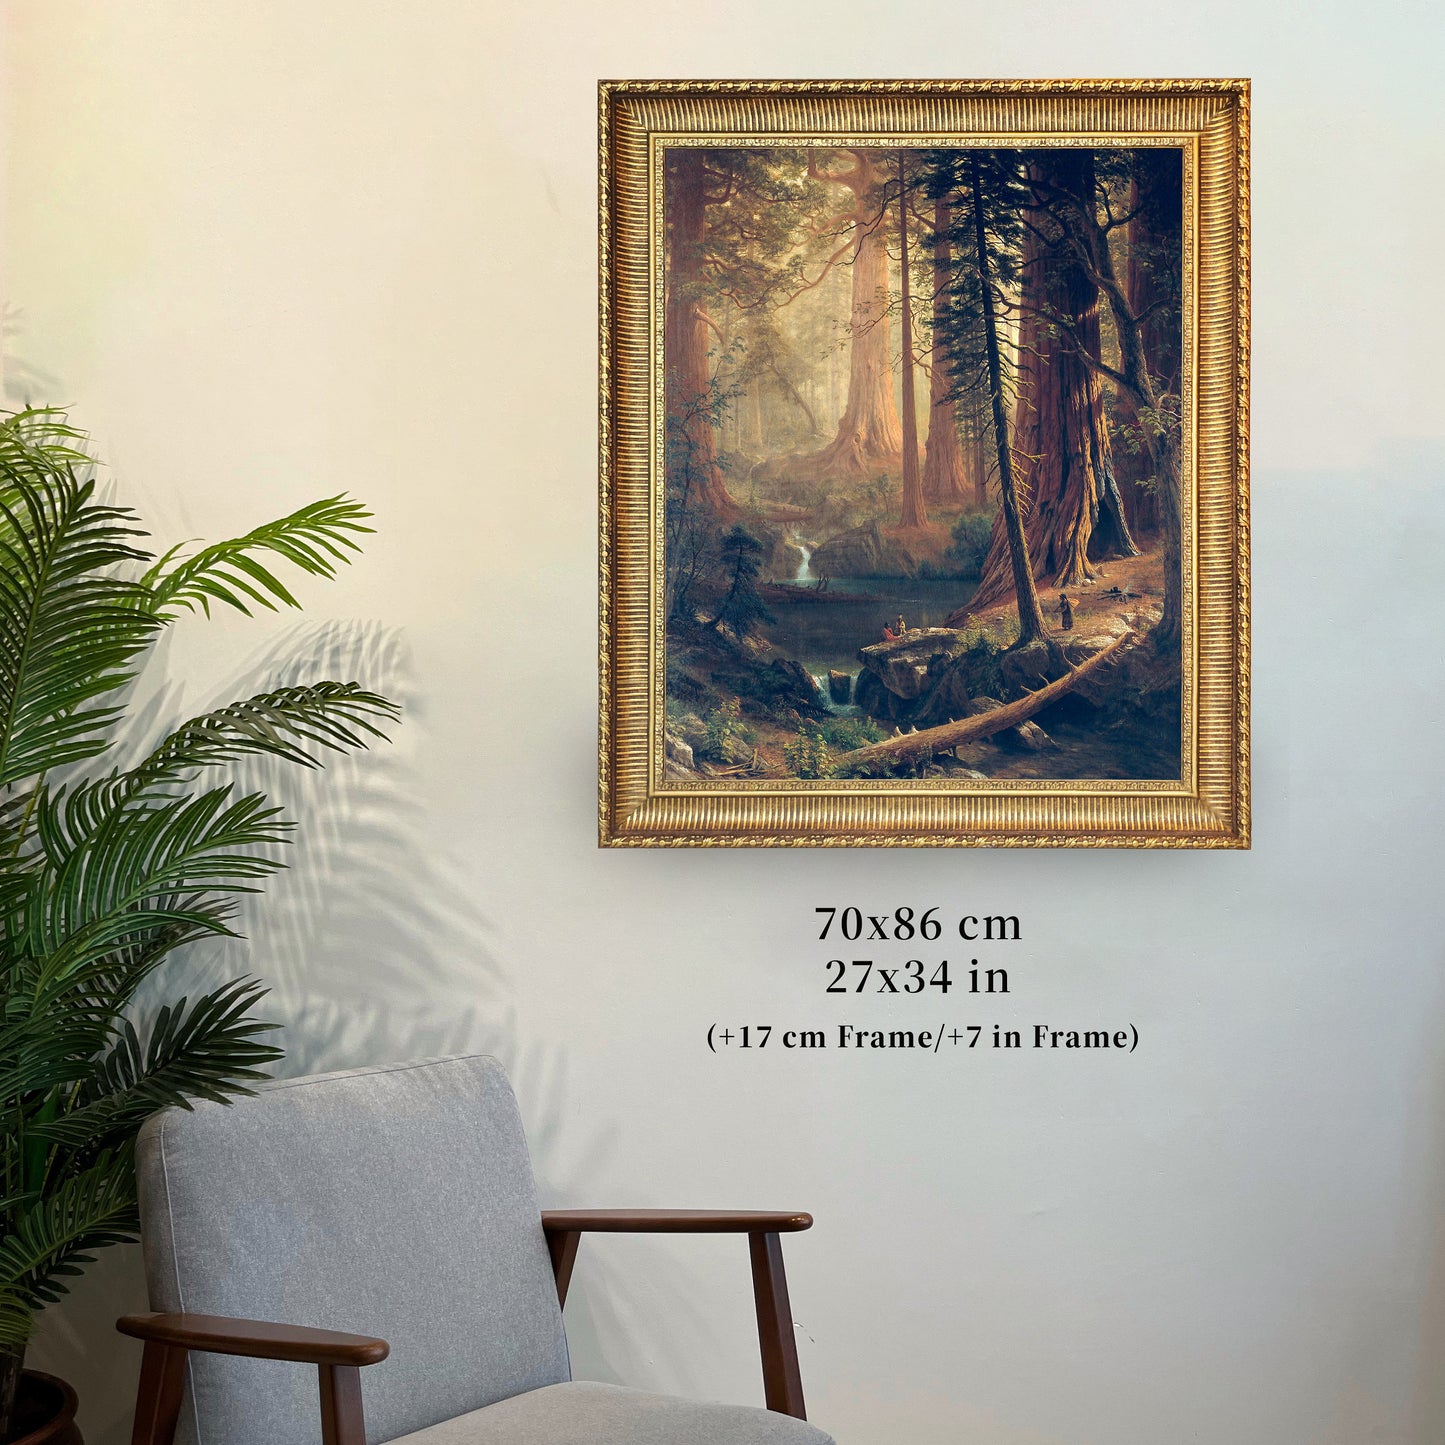 Giant Redwood Trees of California by Albert Bierstadt, 3d Printed with texture and brush strokes looks like original oil-painting, code:001